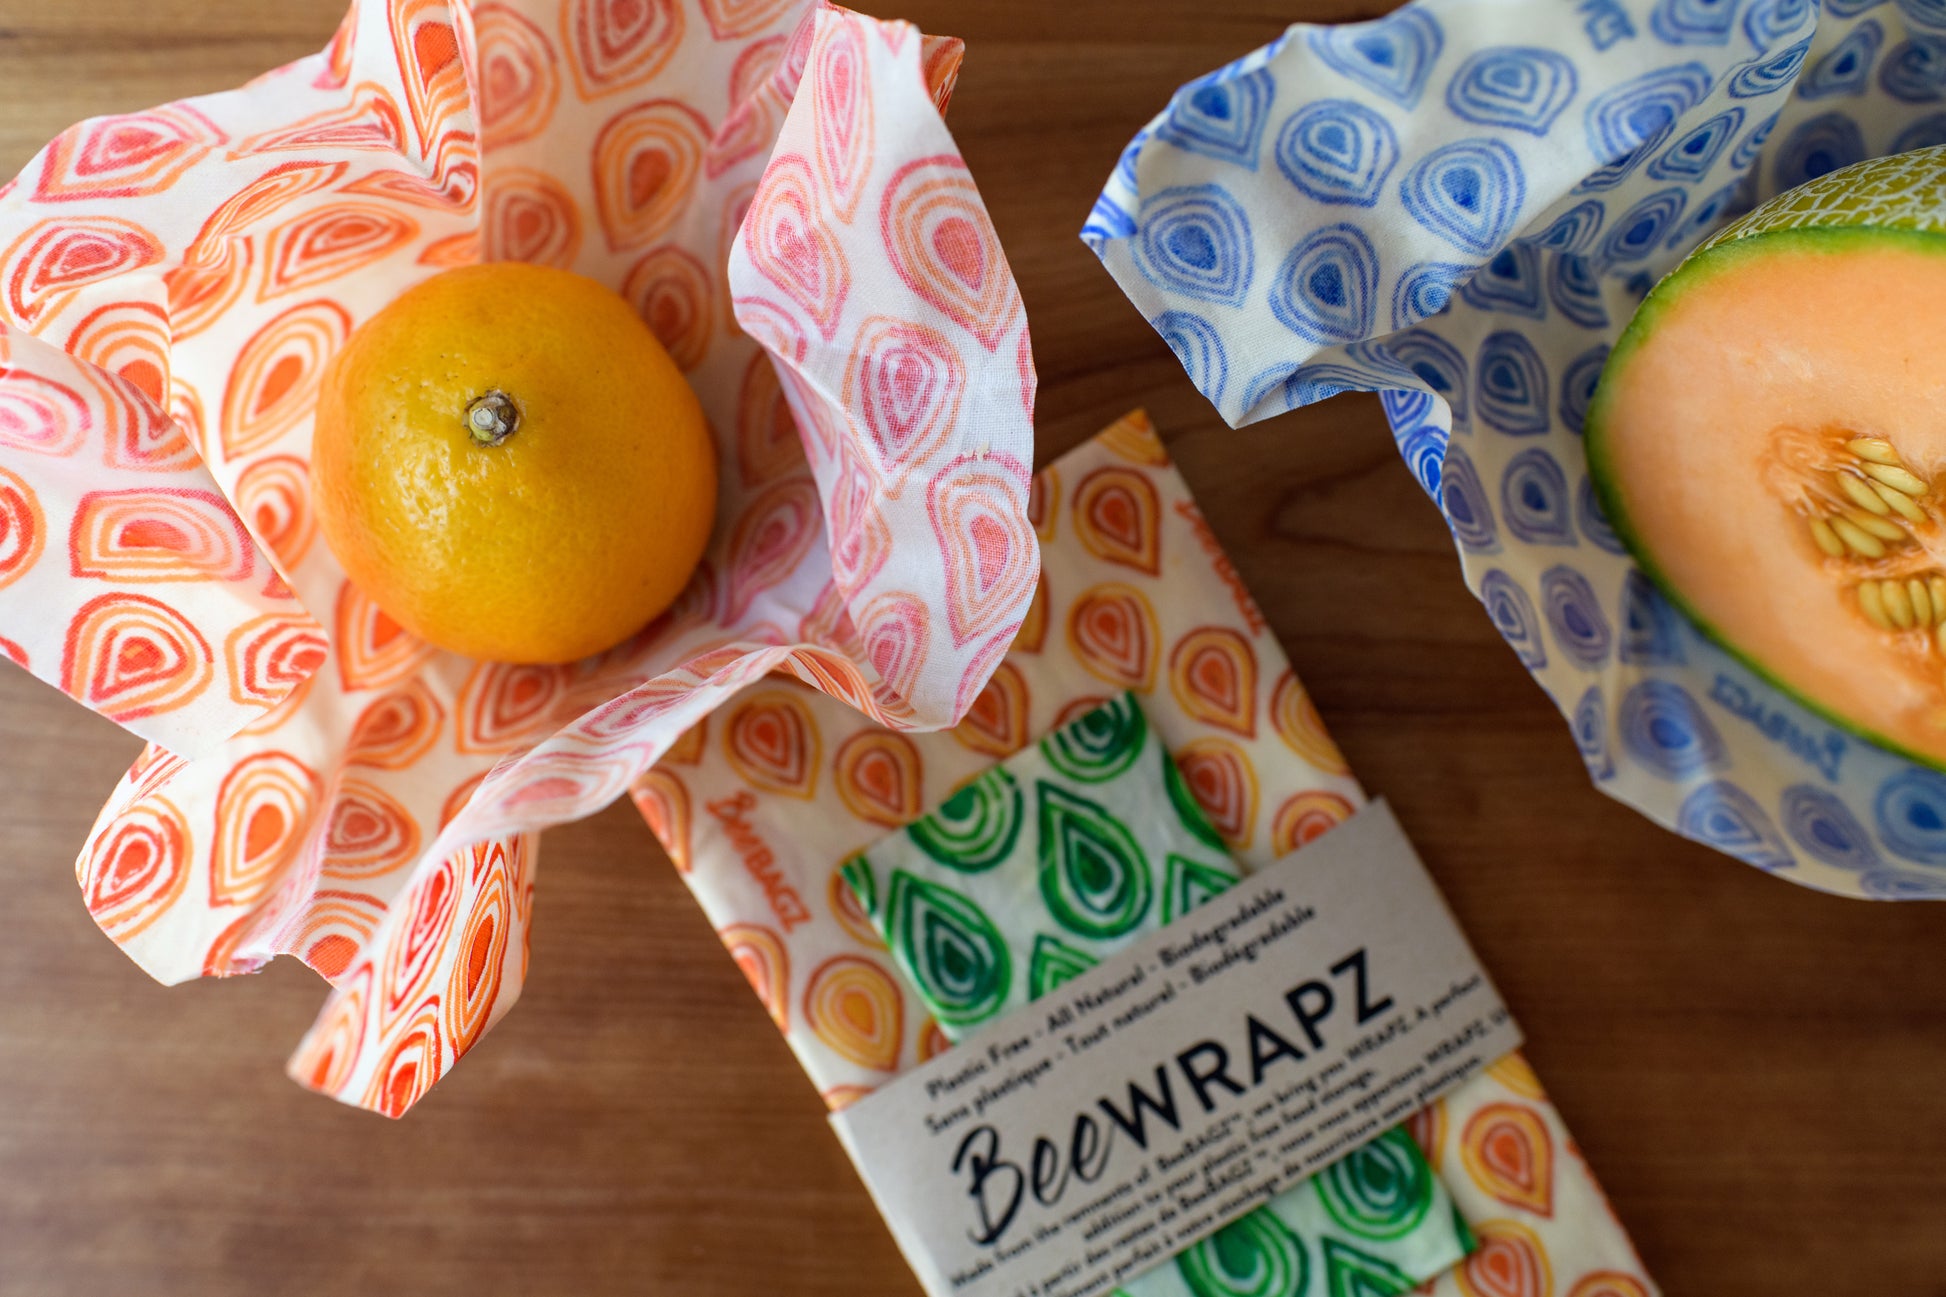 Beeswax wrap that solves your food storage needs. BeeWRAPZ™ are reusable food wraps that tightly cover the tops of cans, bowls, glasses or wrap your cut fruits and veggies keeping them fresher, longer. Another great addition to your plastic free food storage lineup.